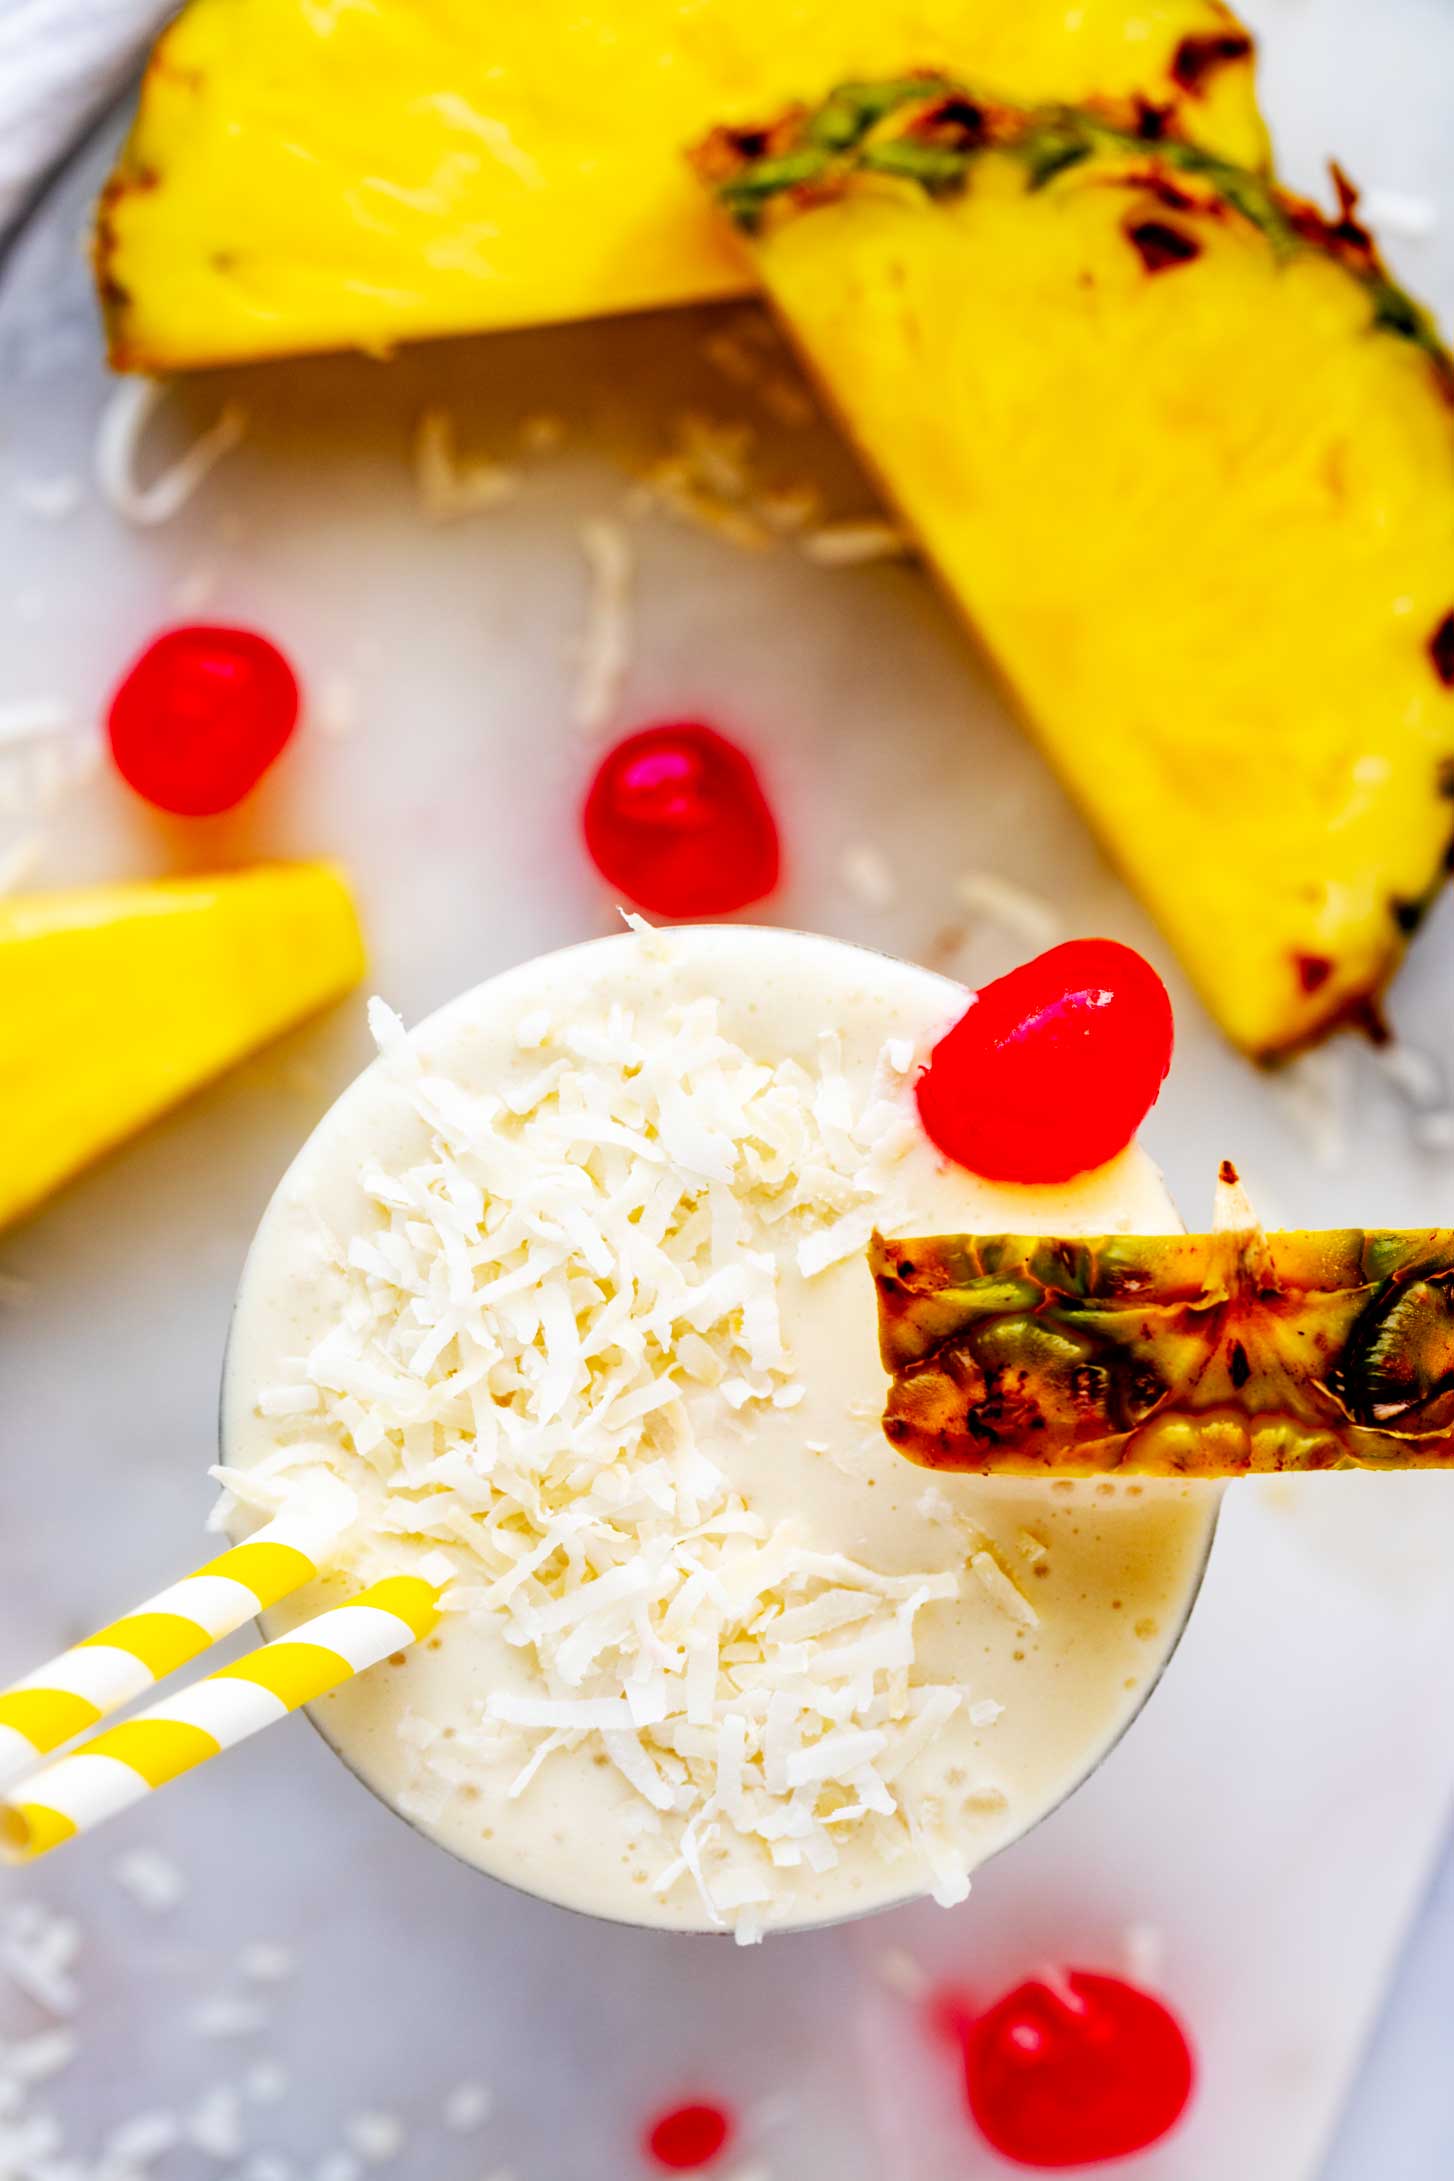 Overhead photo of a phina colada smoothie garnished with coconut, pineapple, and a cherry.